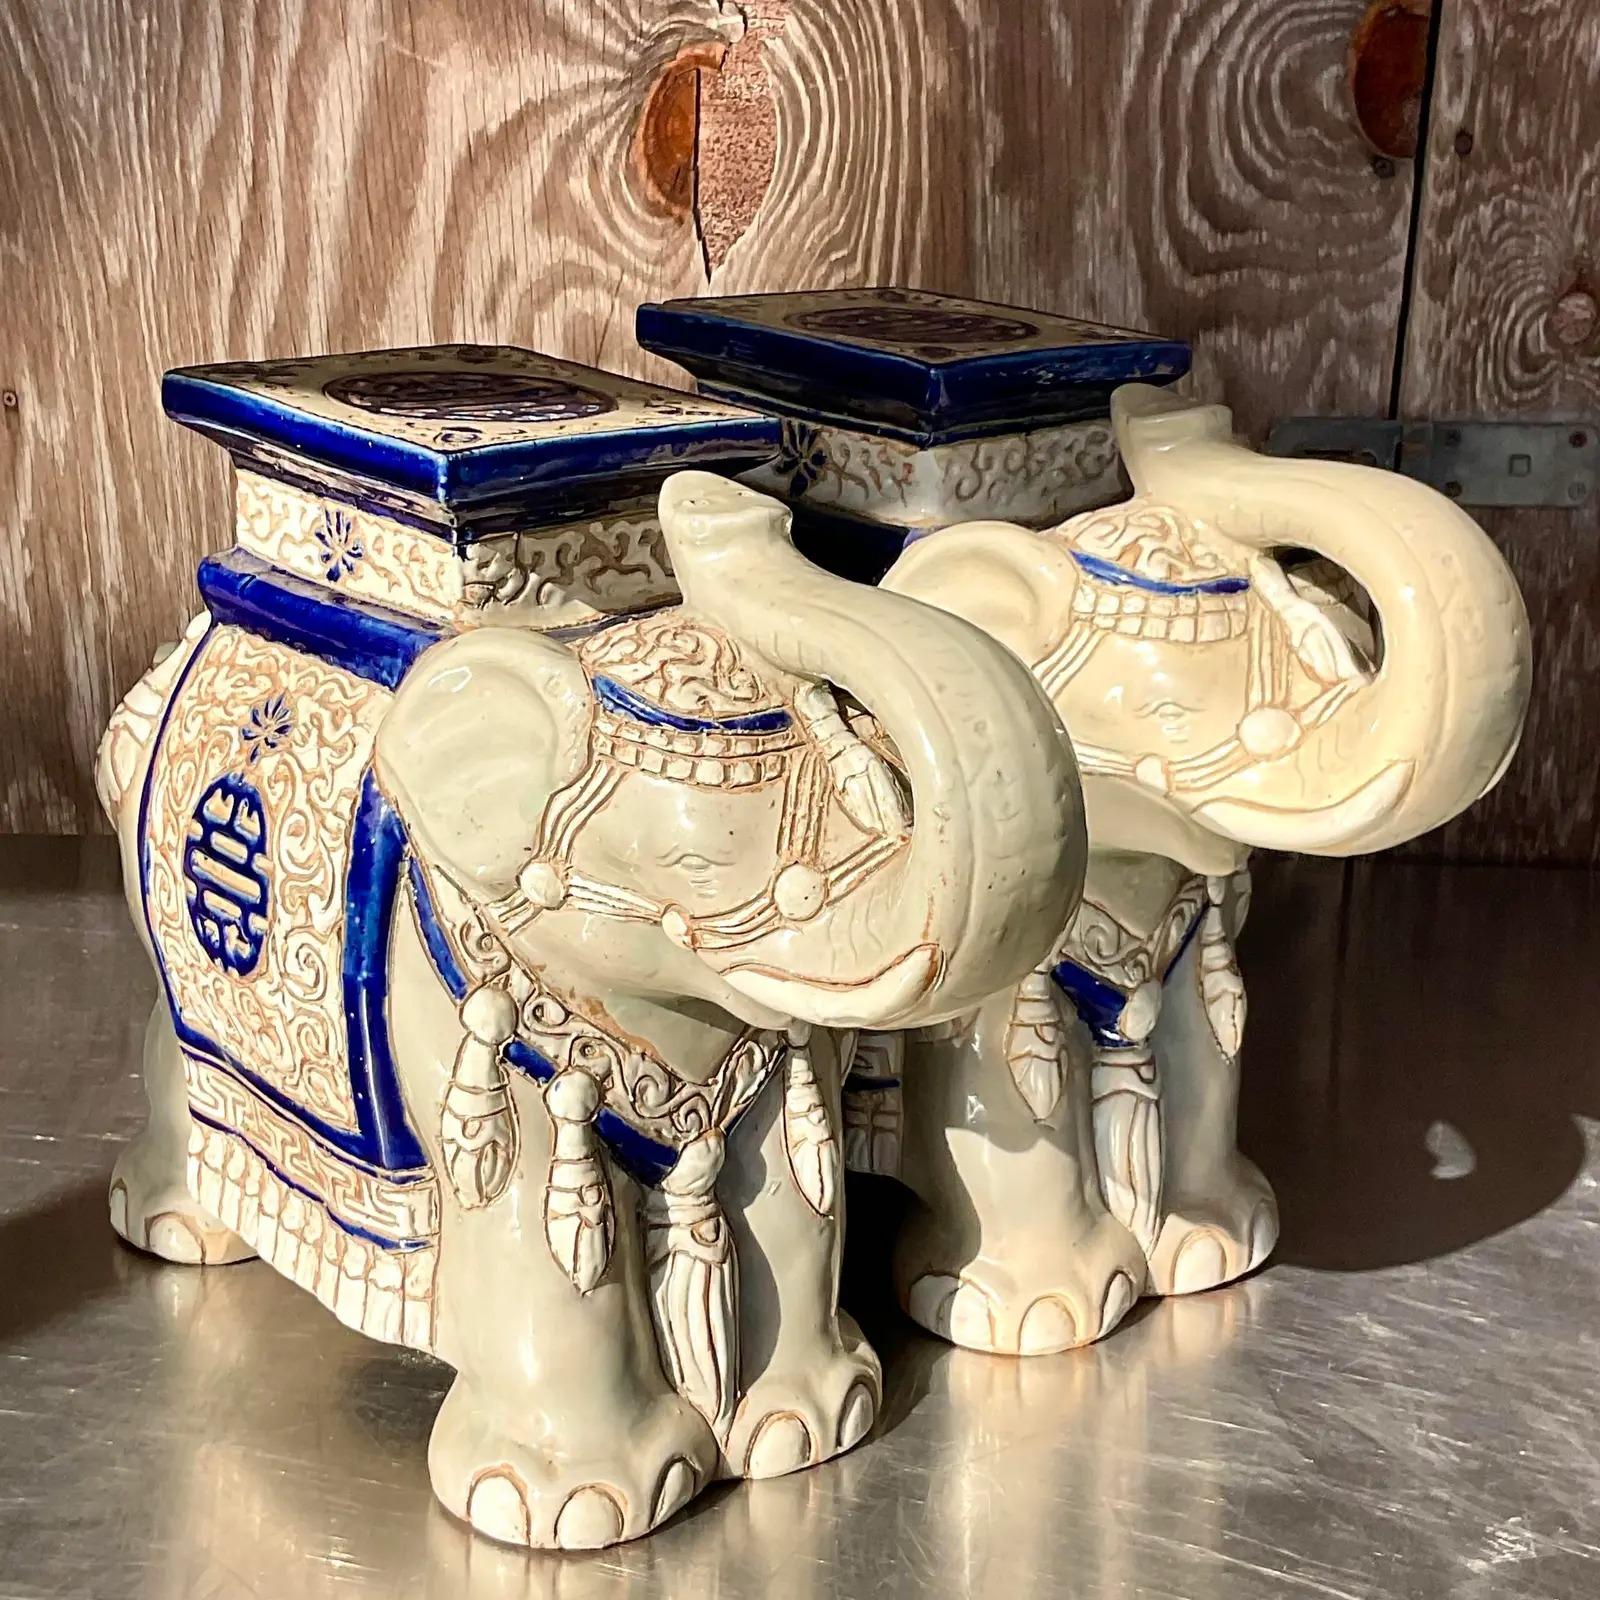 A fabulous pair of vintage Regency Elephants. A glazed ceramic finish with hand painted detail. Perfect for your orchids or glass of wine. You decide. Acquired from a Palm Beach estate.